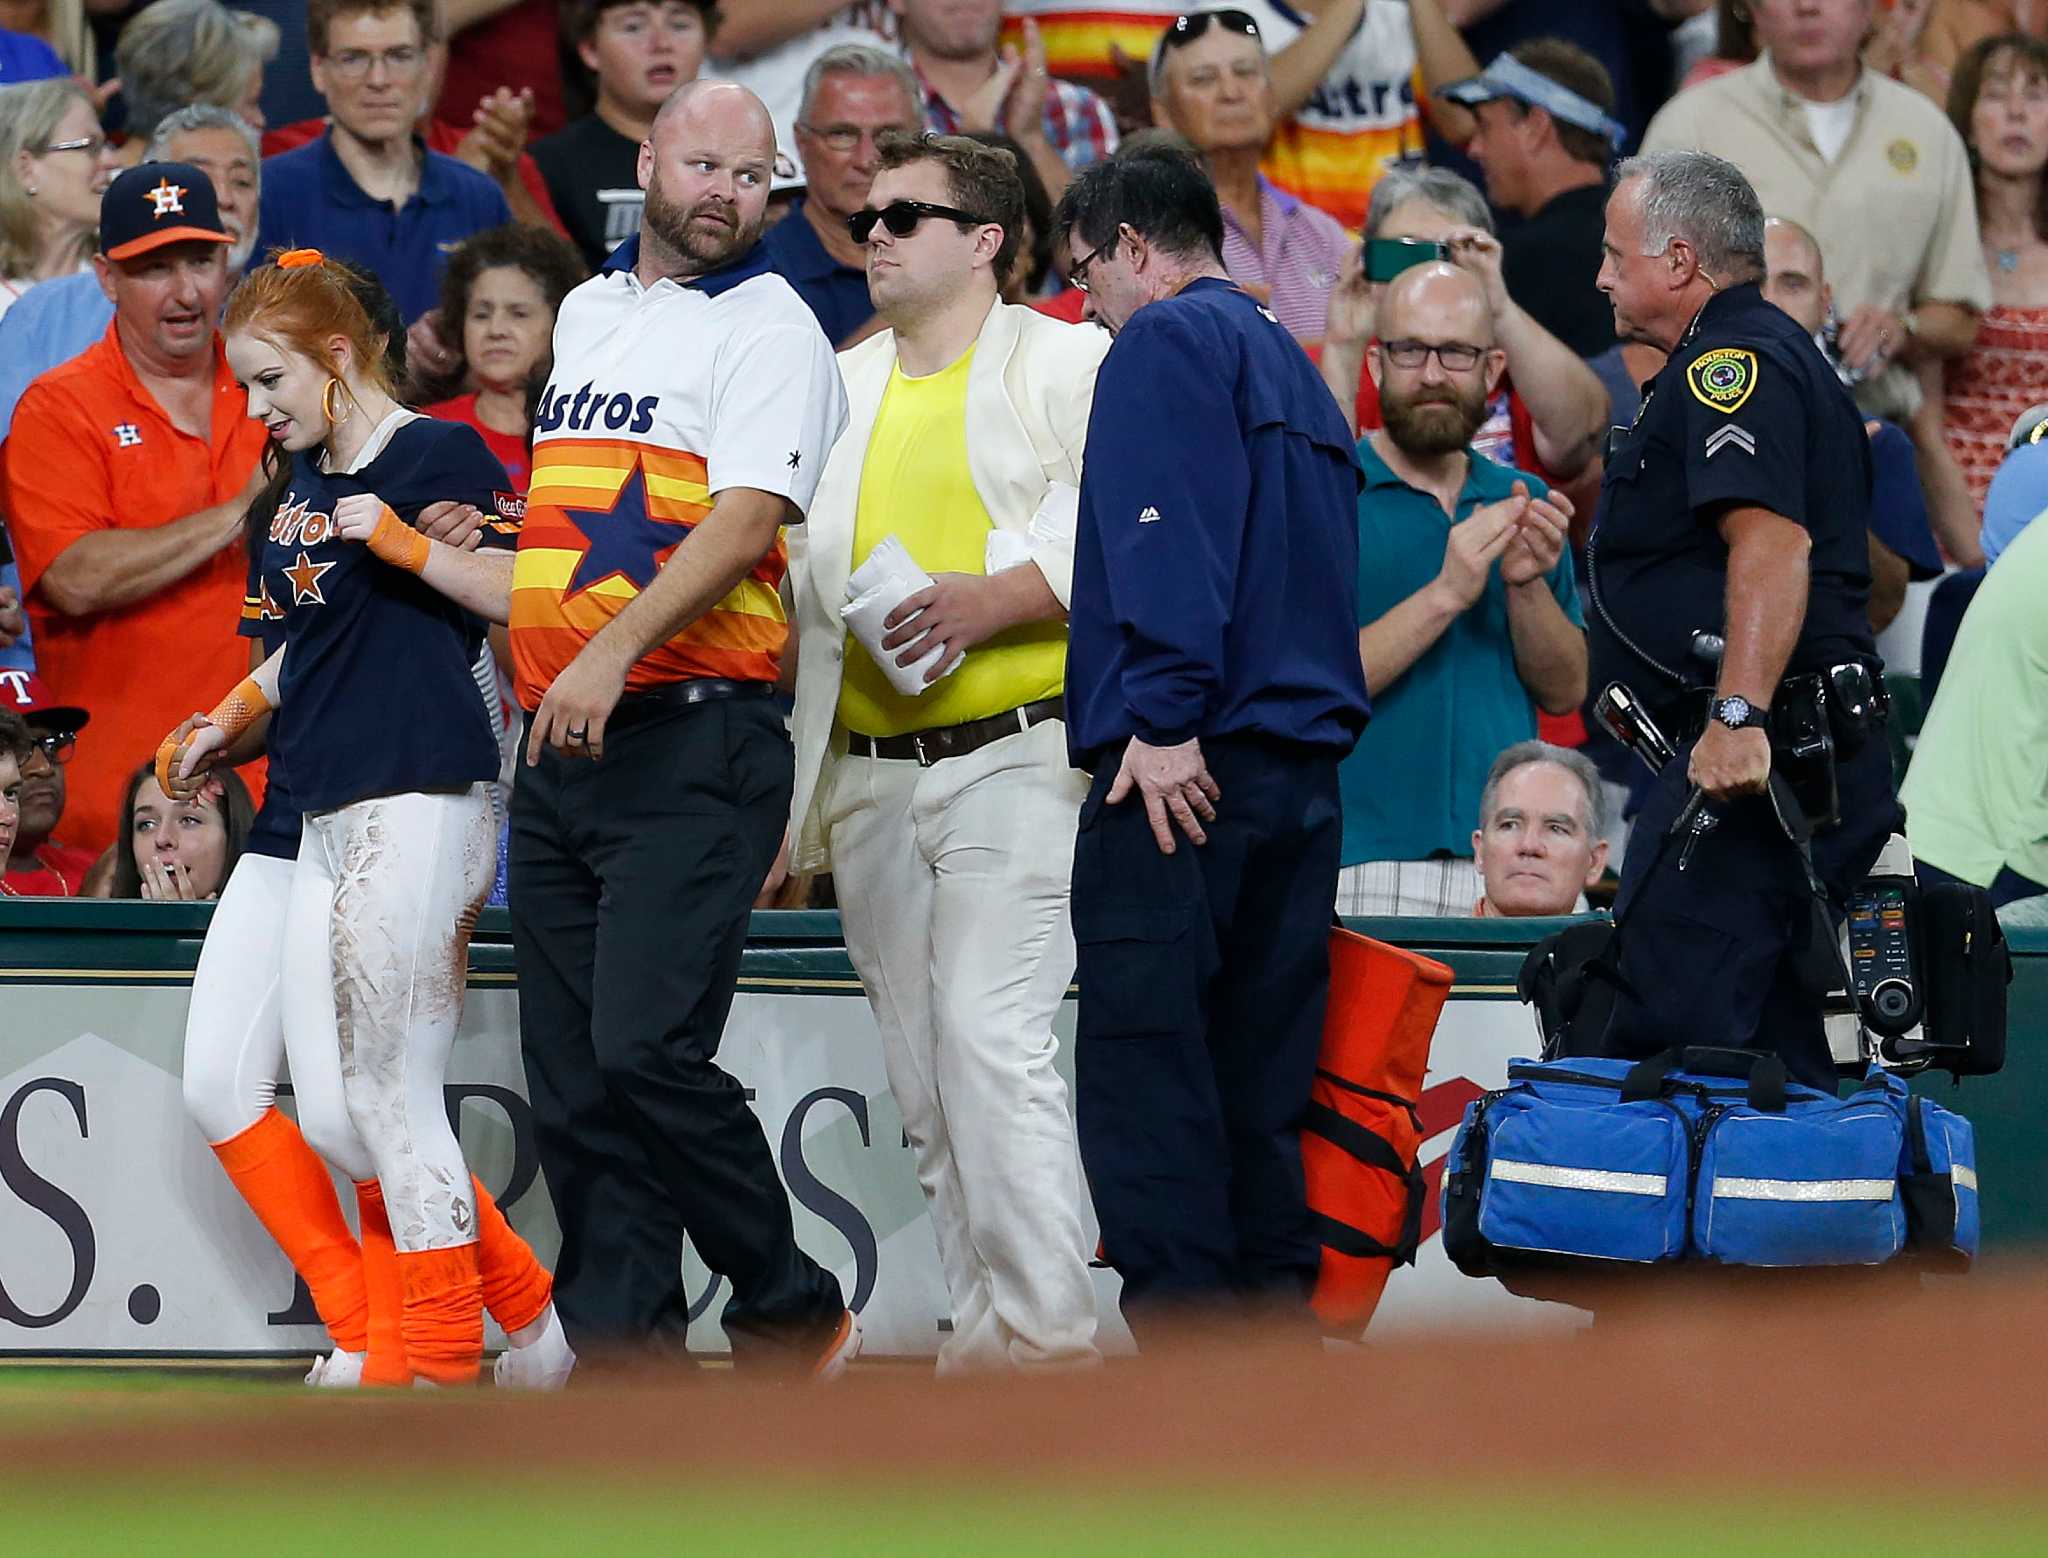 Identity Of Gorgeous Model Spotted Praying During Astros Game Revealed 